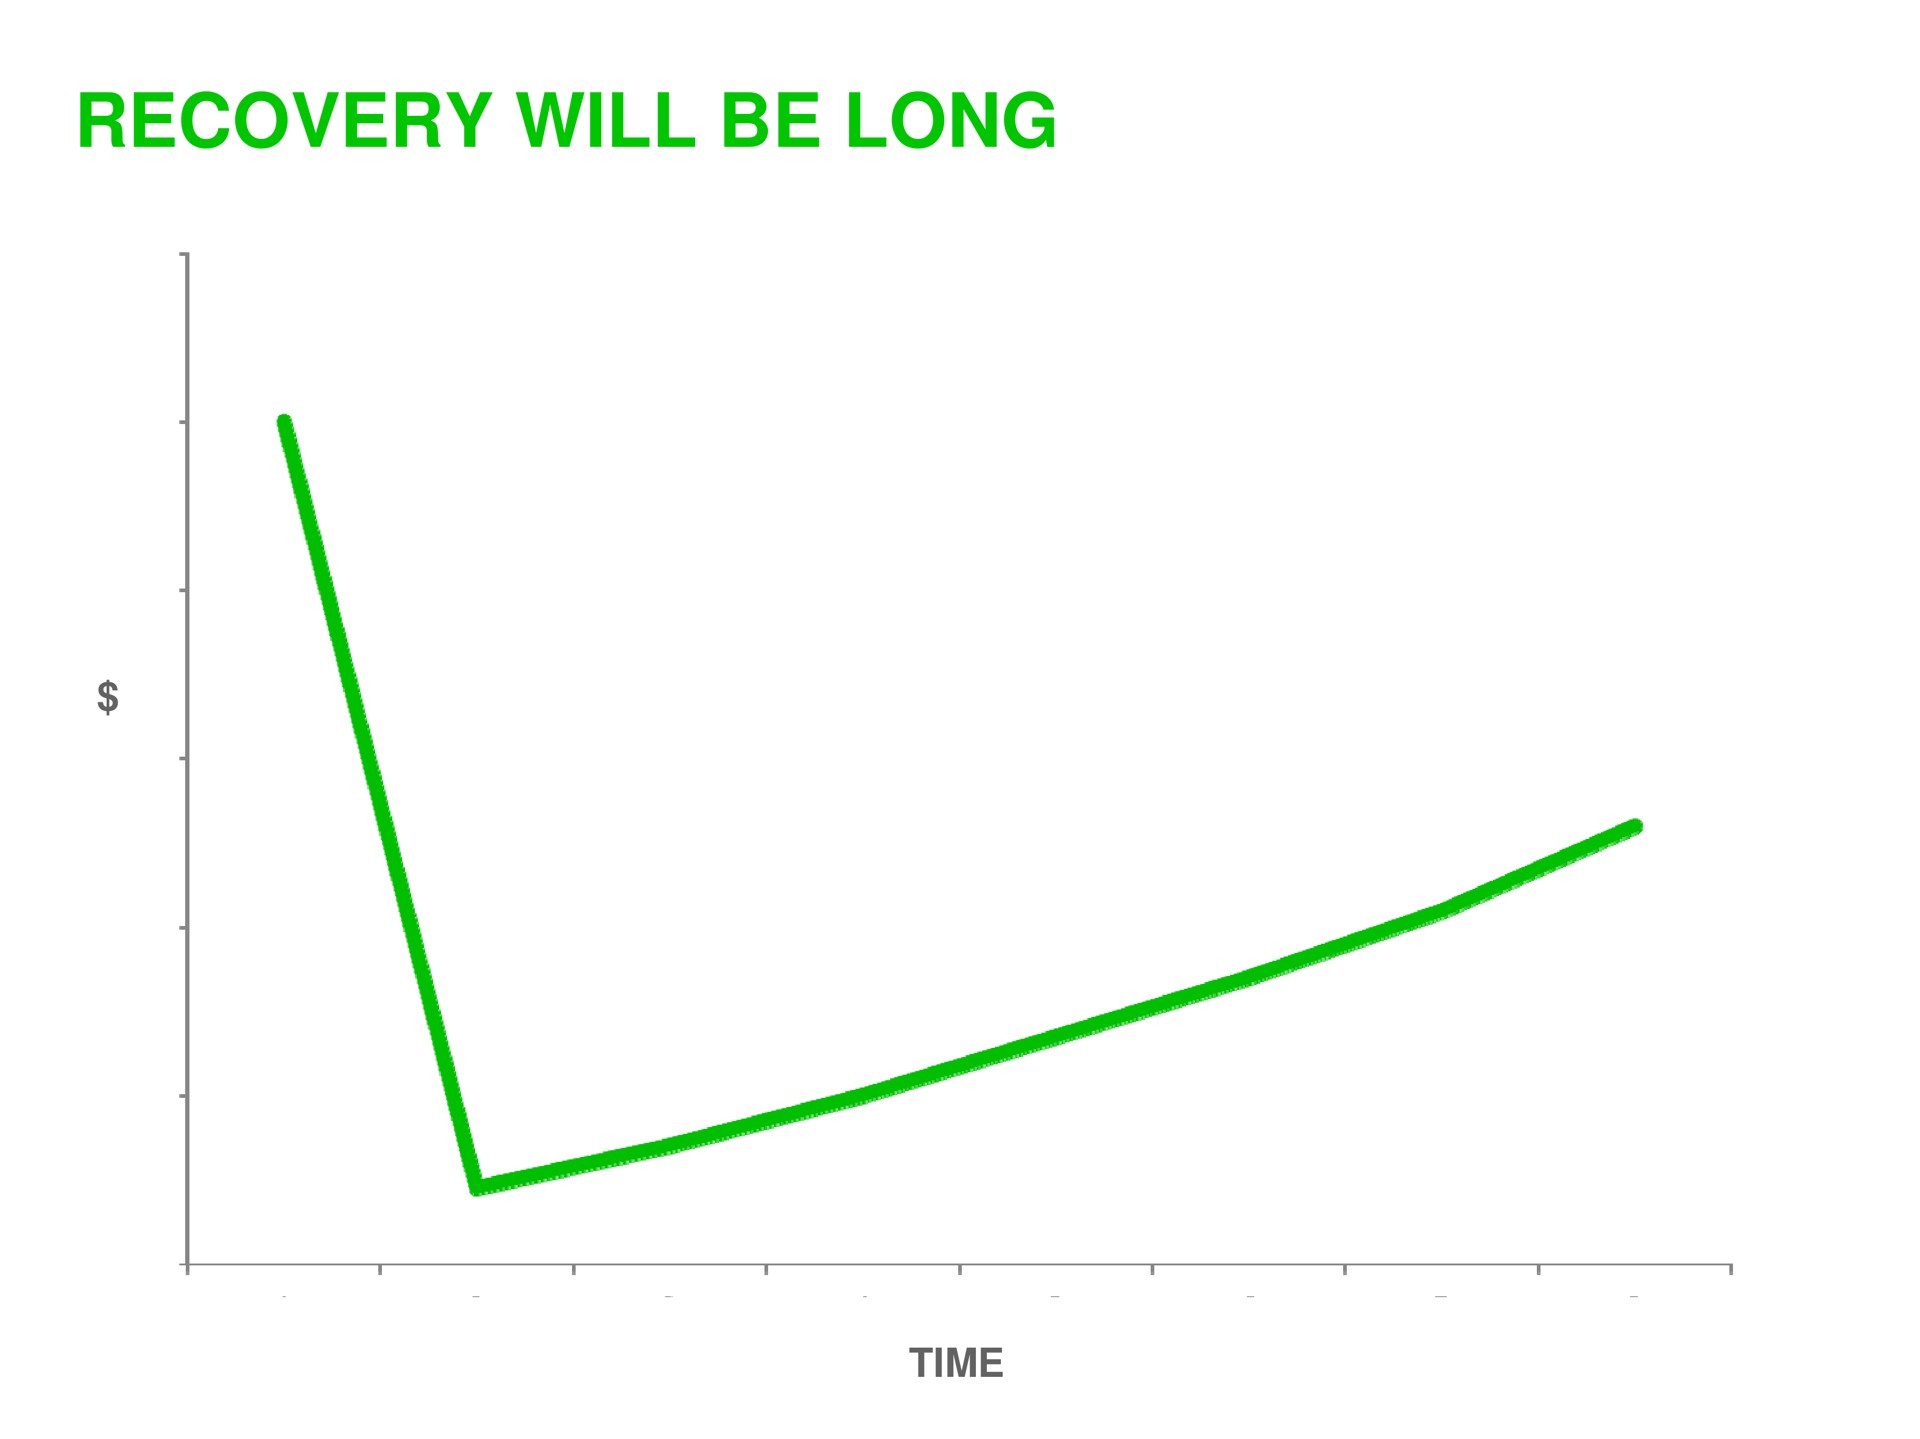 recovery will be long | Sequoia Capital